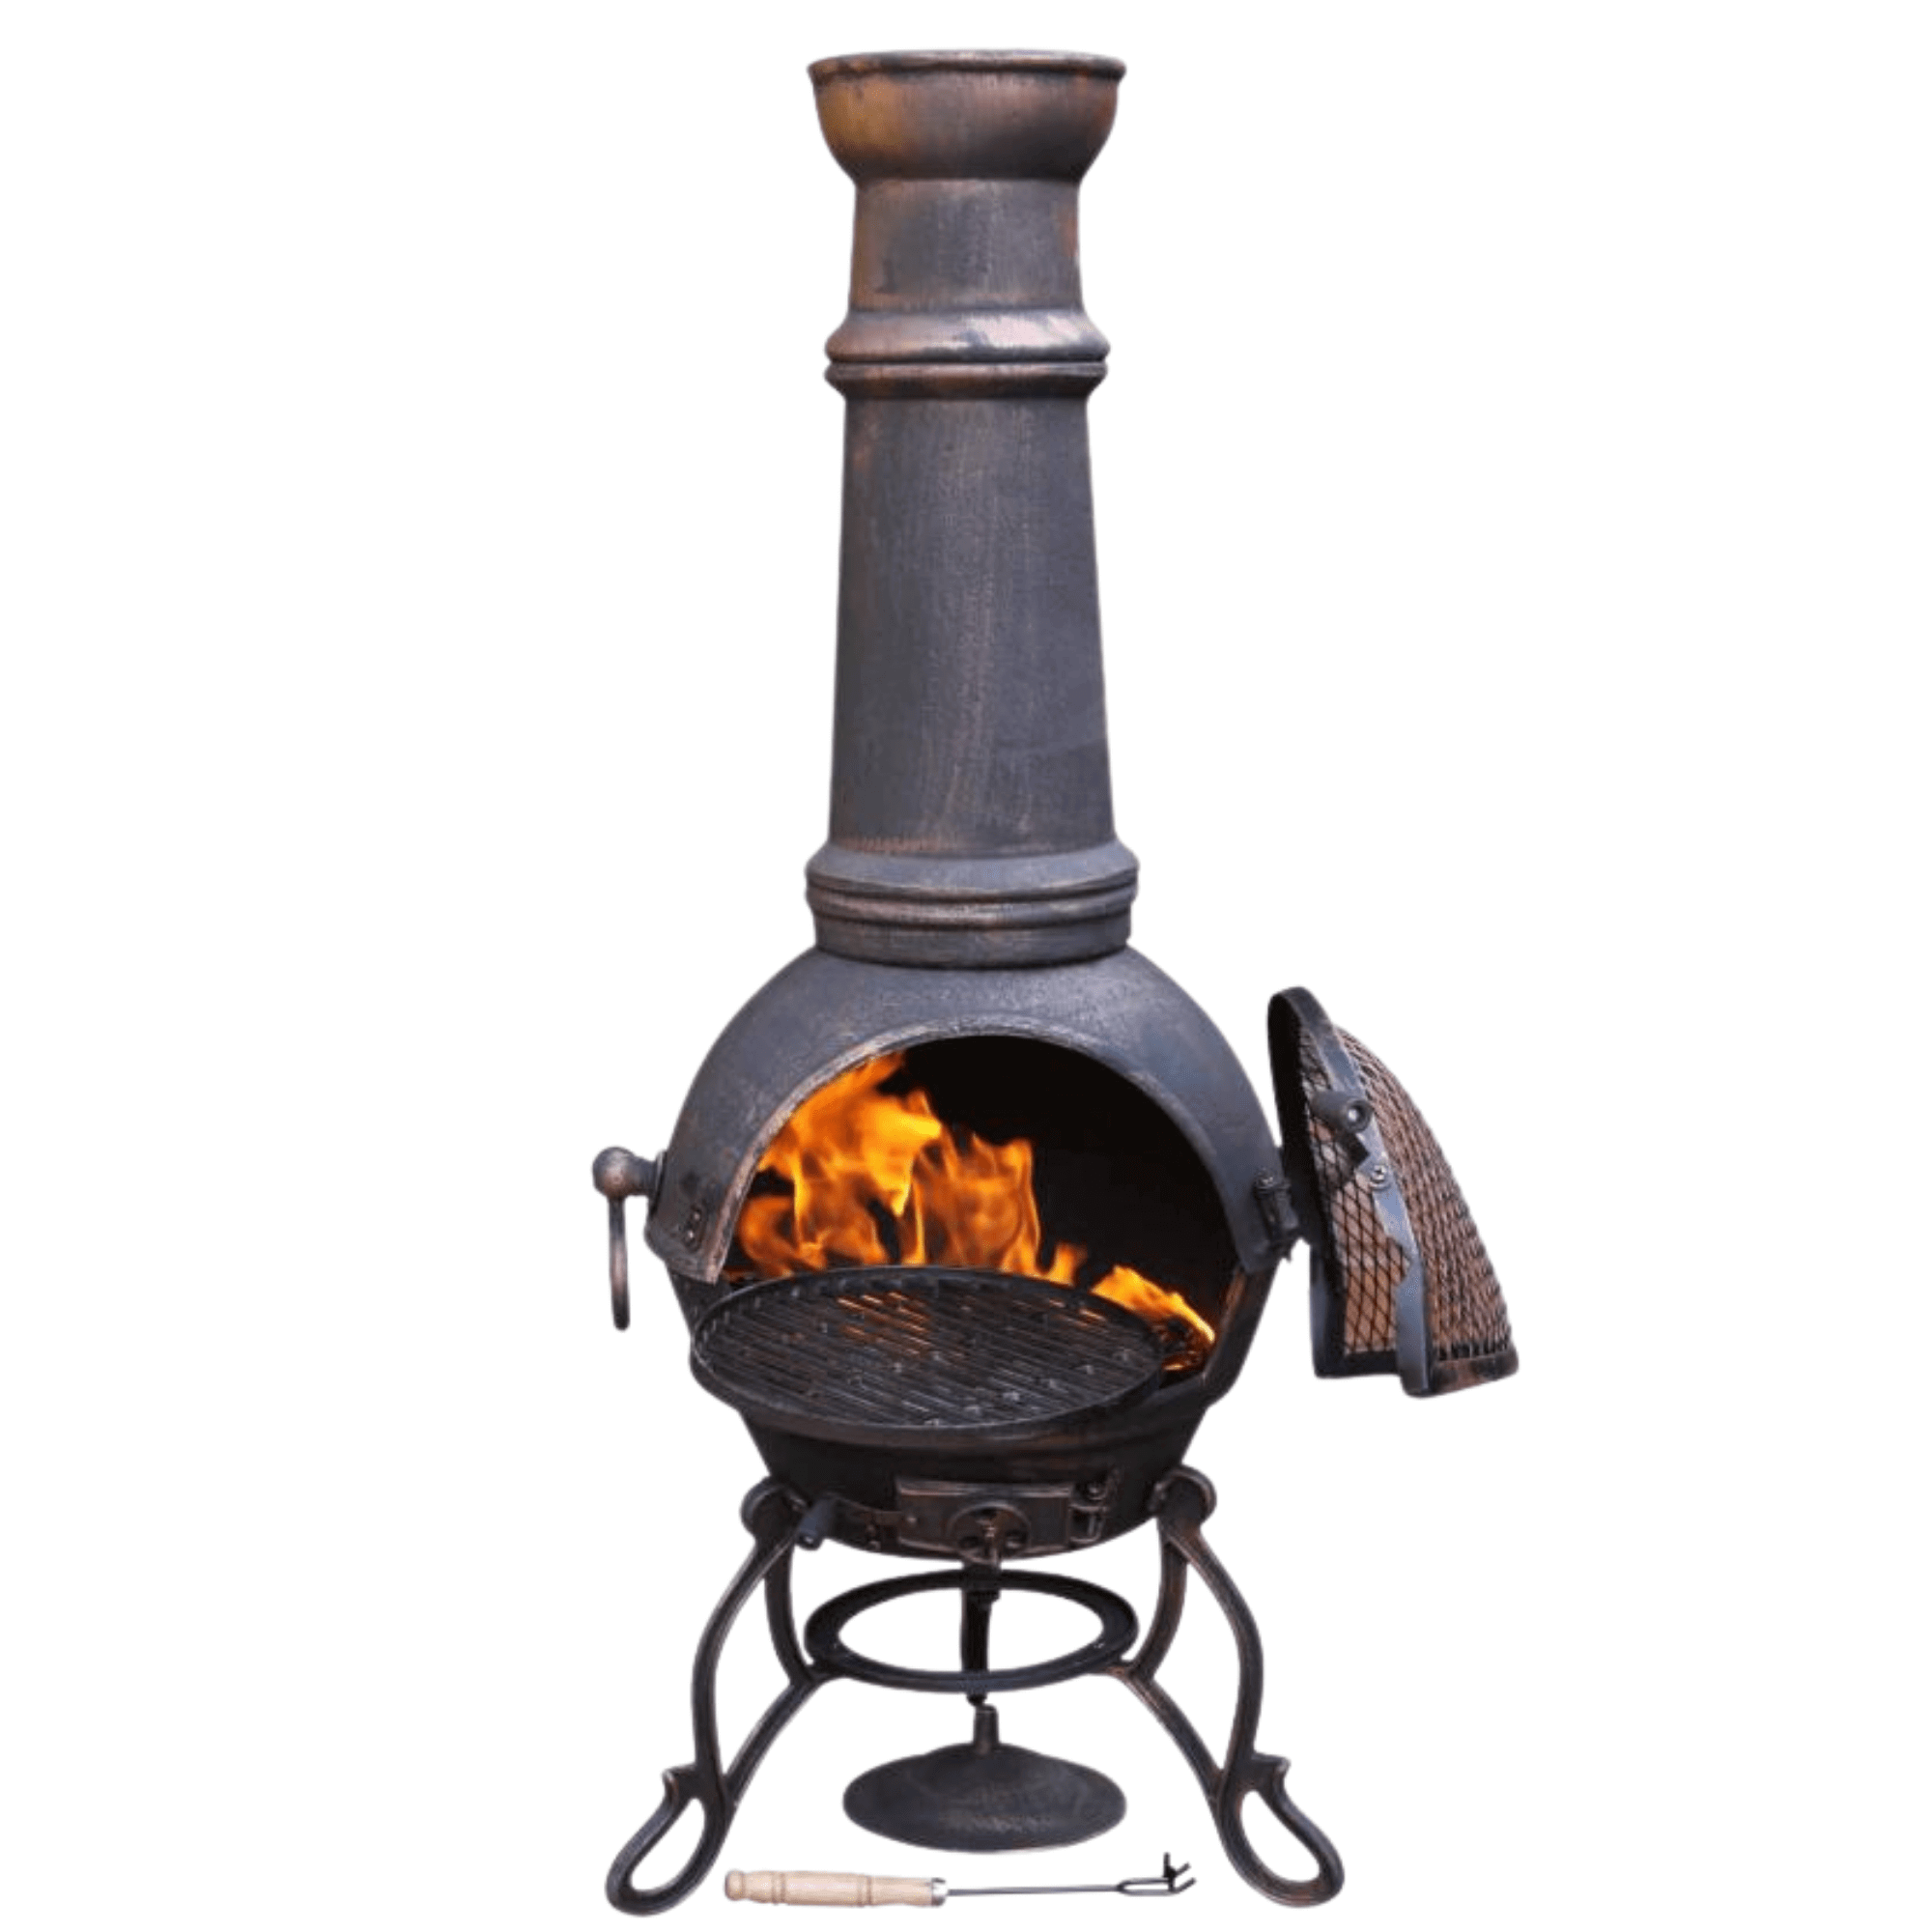 Perfect Patio Toledo Cast Iron BBQ Chimenea in Bronze - Extra Large Cast Iron Chiminea with BBQ Grill